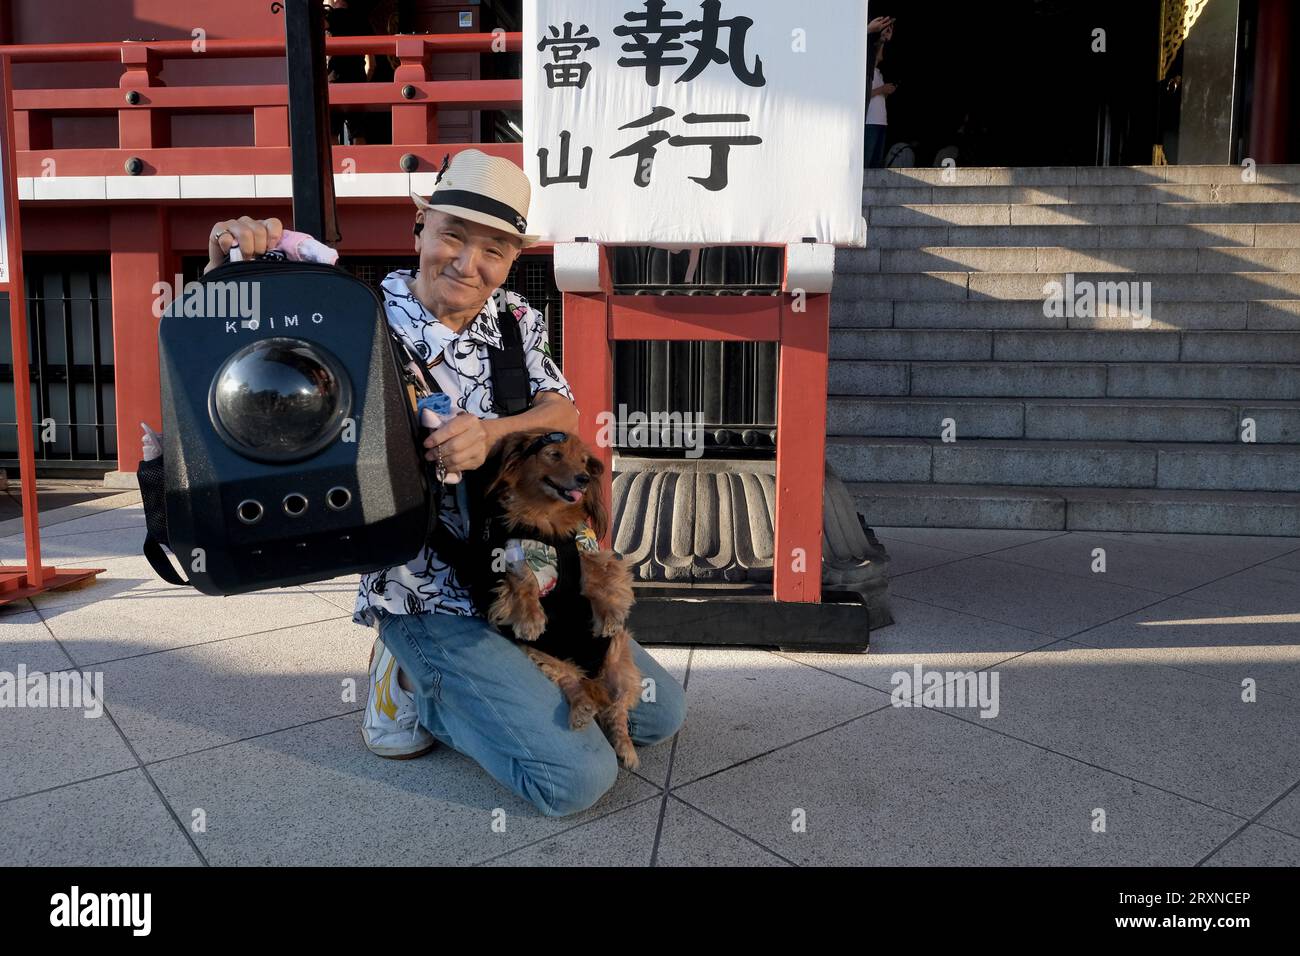 An elderly Japanese male street performer poses with his dog in  Asakusa,Tokyo, Japan Stock Photo